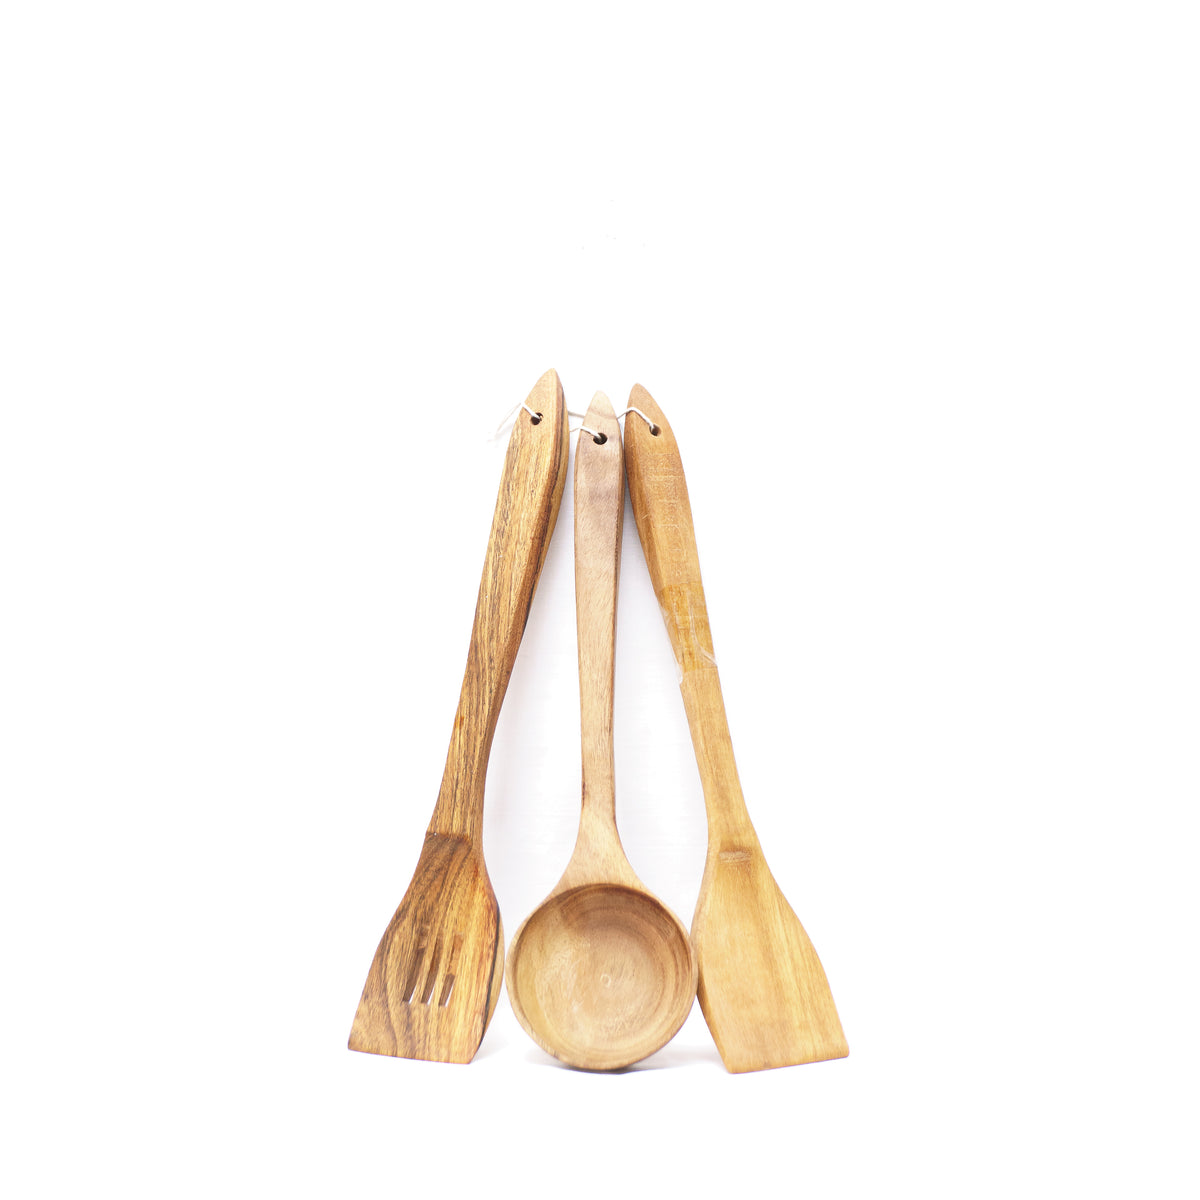 Premium Wood Kitchen Spoon Trio: Elevate Your Cooking Experience